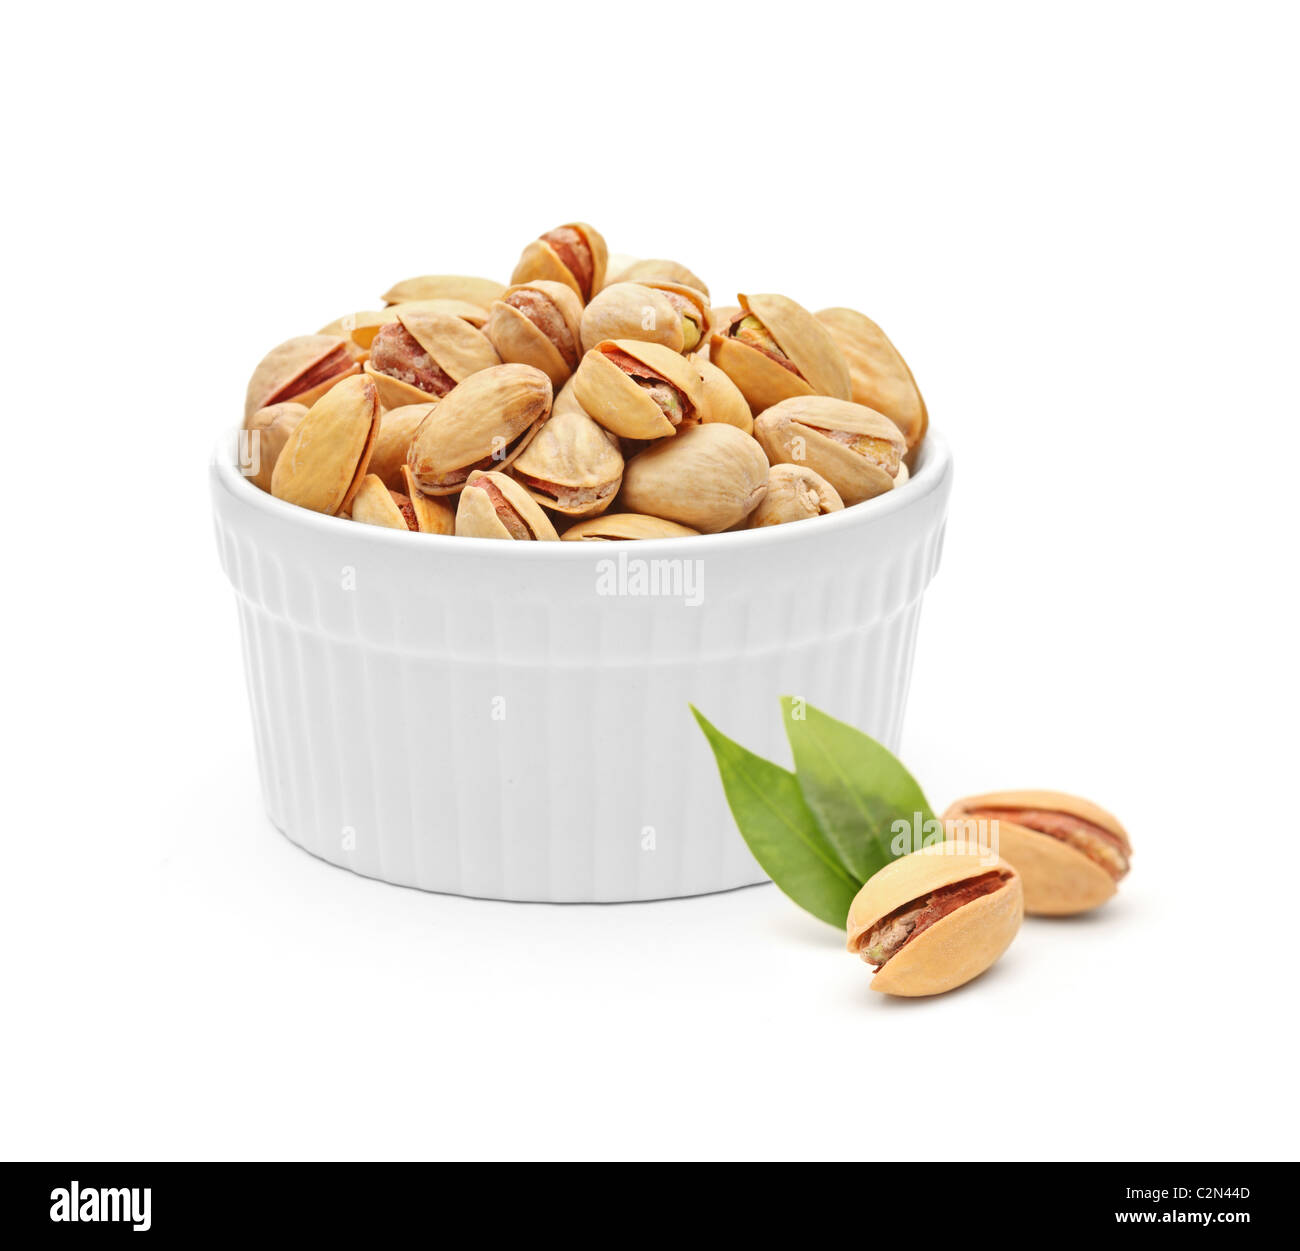 Salted and roasted pistachio nuts Stock Photo